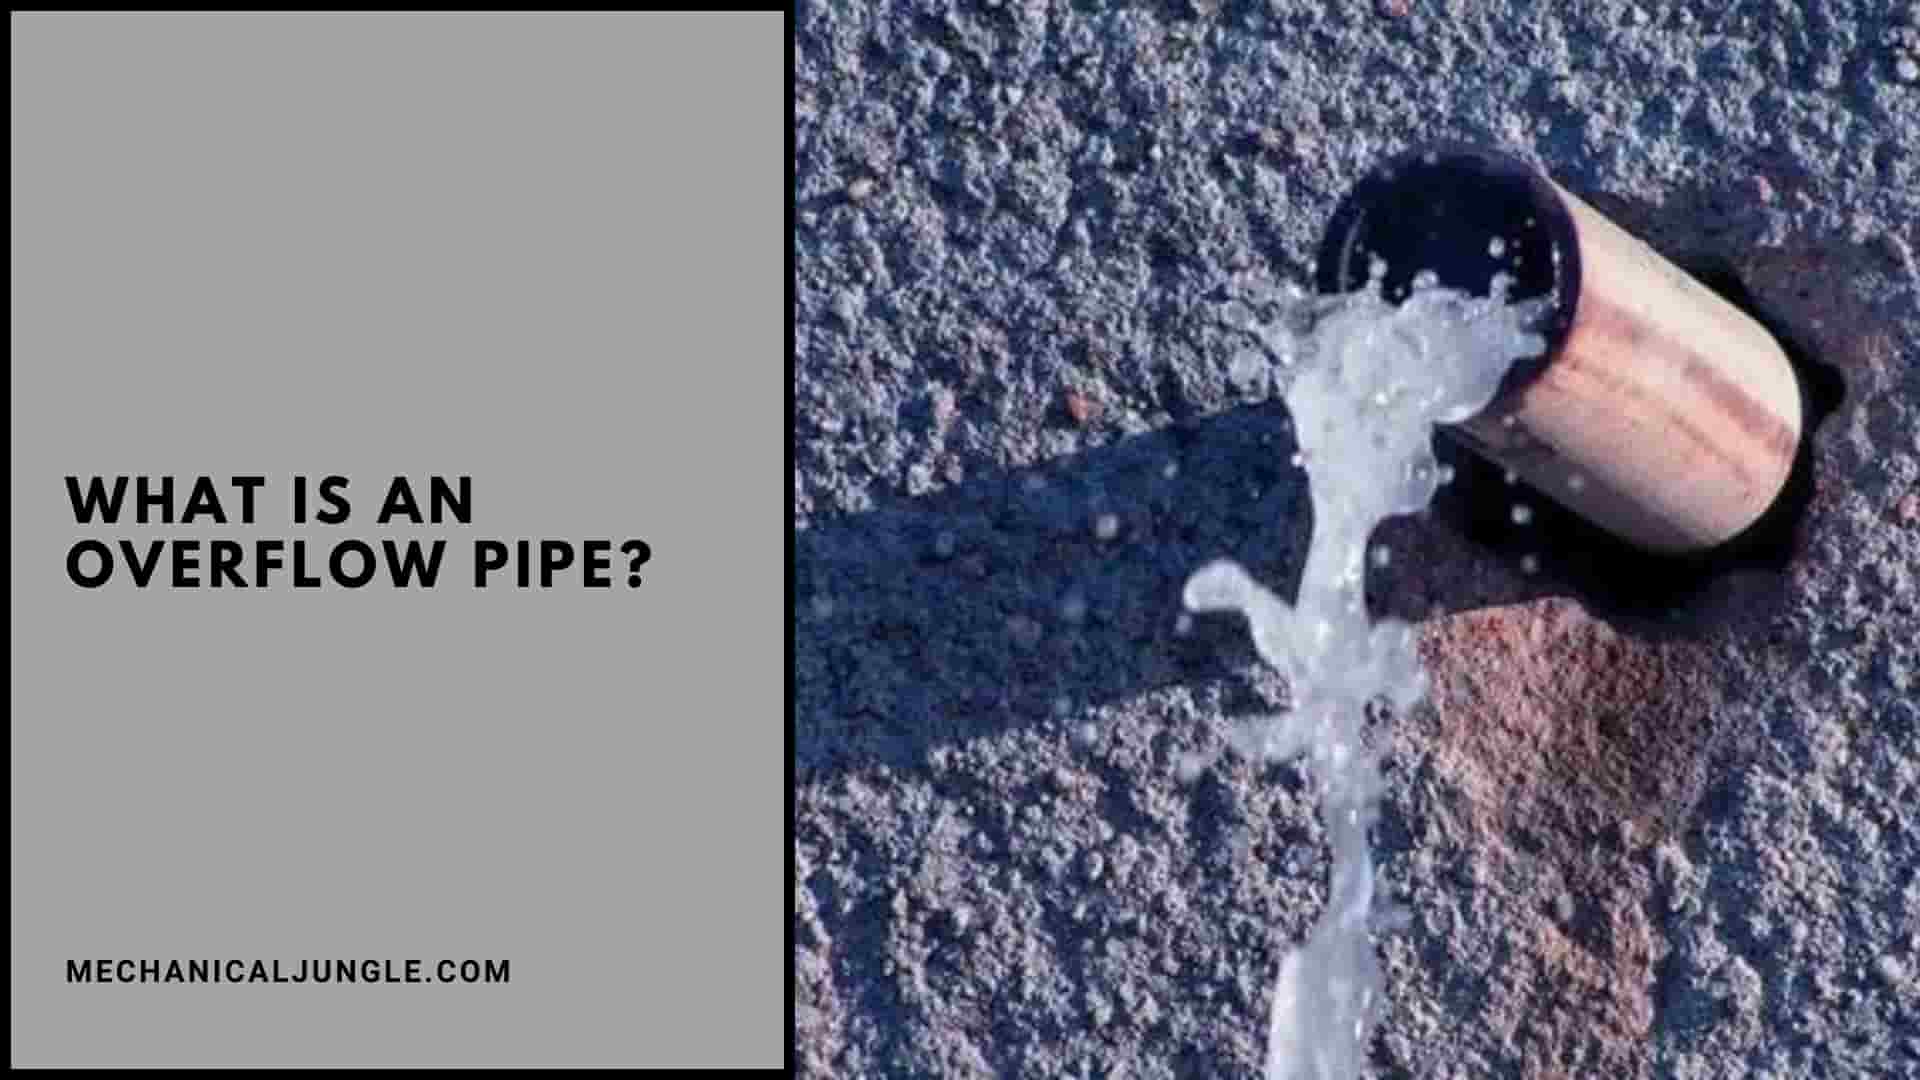 What Is an Overflow Pipe?